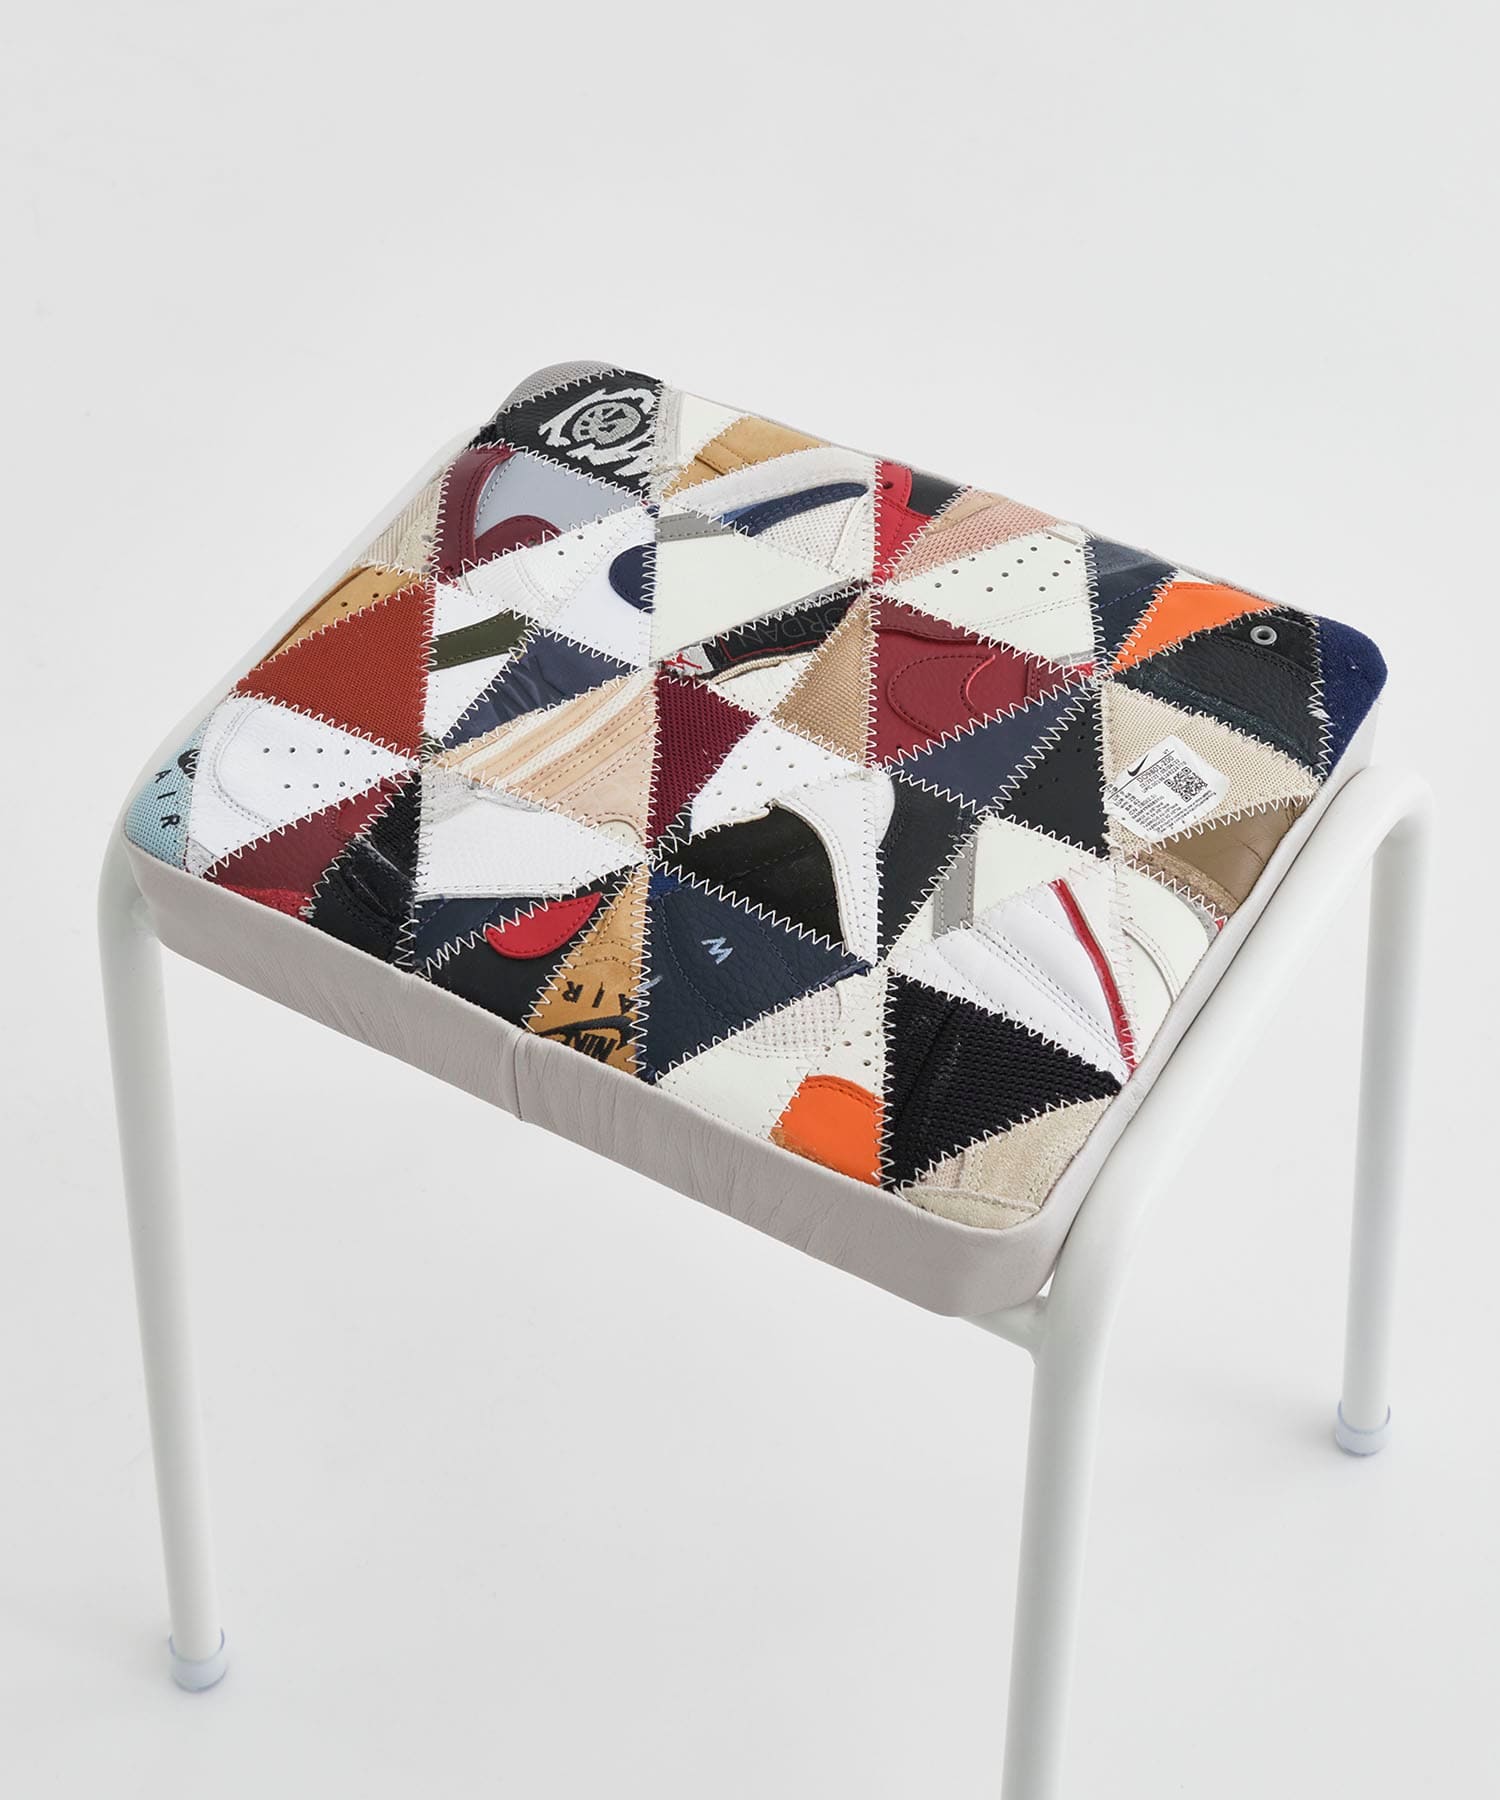 RECOUTURE PATCHWORK STOOL RECOUTURE